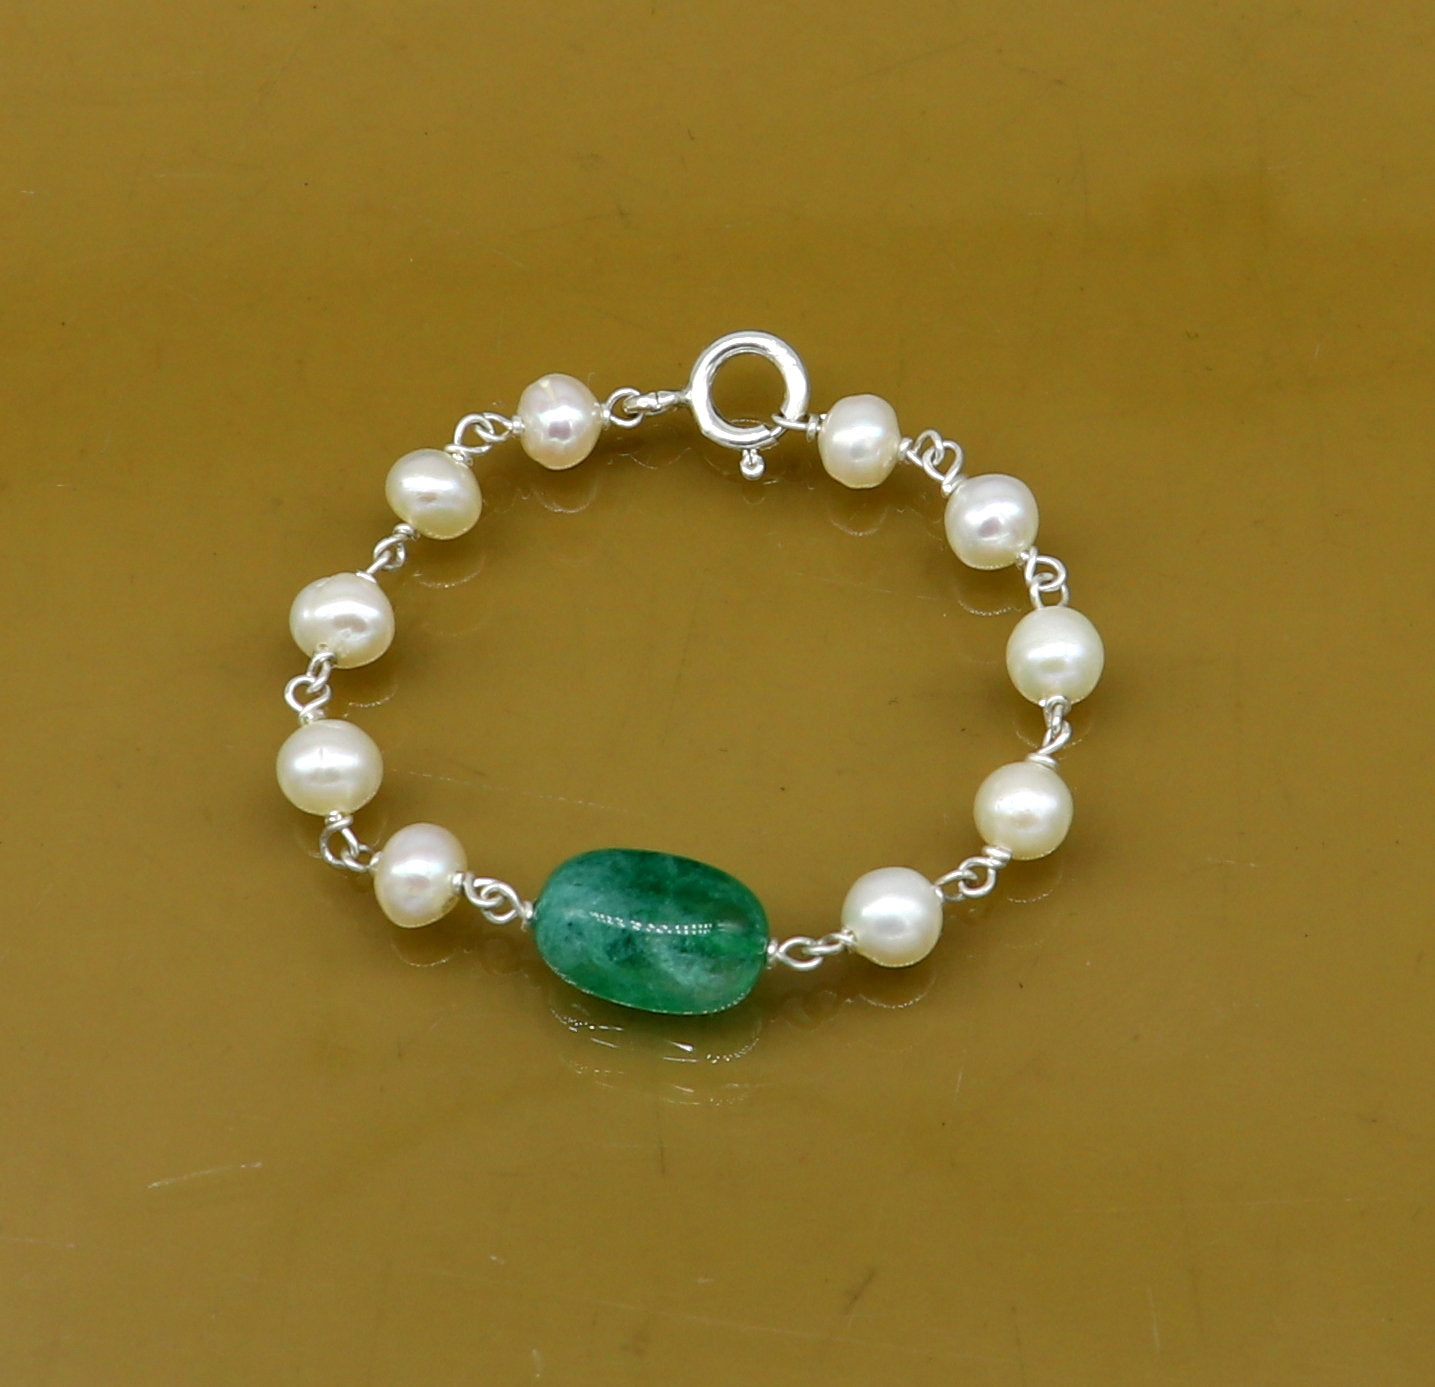 4.5 inches long handmade 925 sterling silver beaded bracelet, pearl and jade stone baby bracelet, unisex new born kids jewelry bbr5 - TRIBAL ORNAMENTS